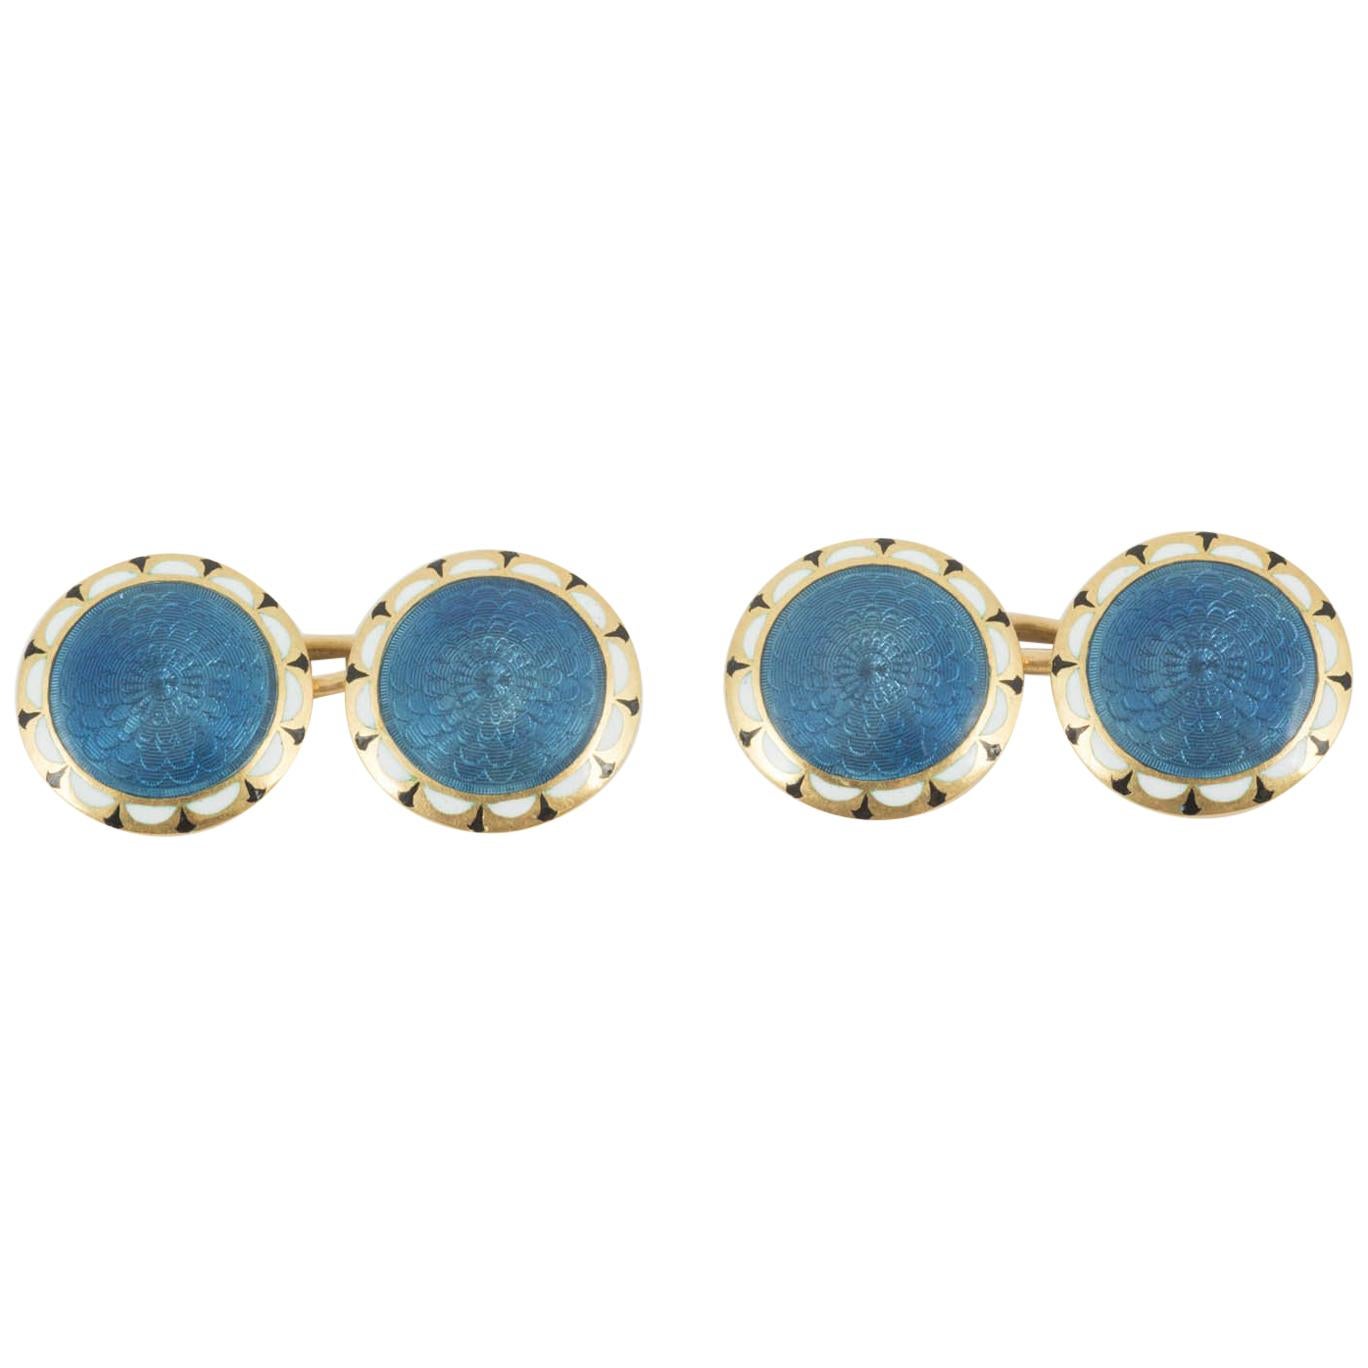 Cufflinks 18 Carat Gold with Blue, Black and White Enamel, English, circa 1910 For Sale